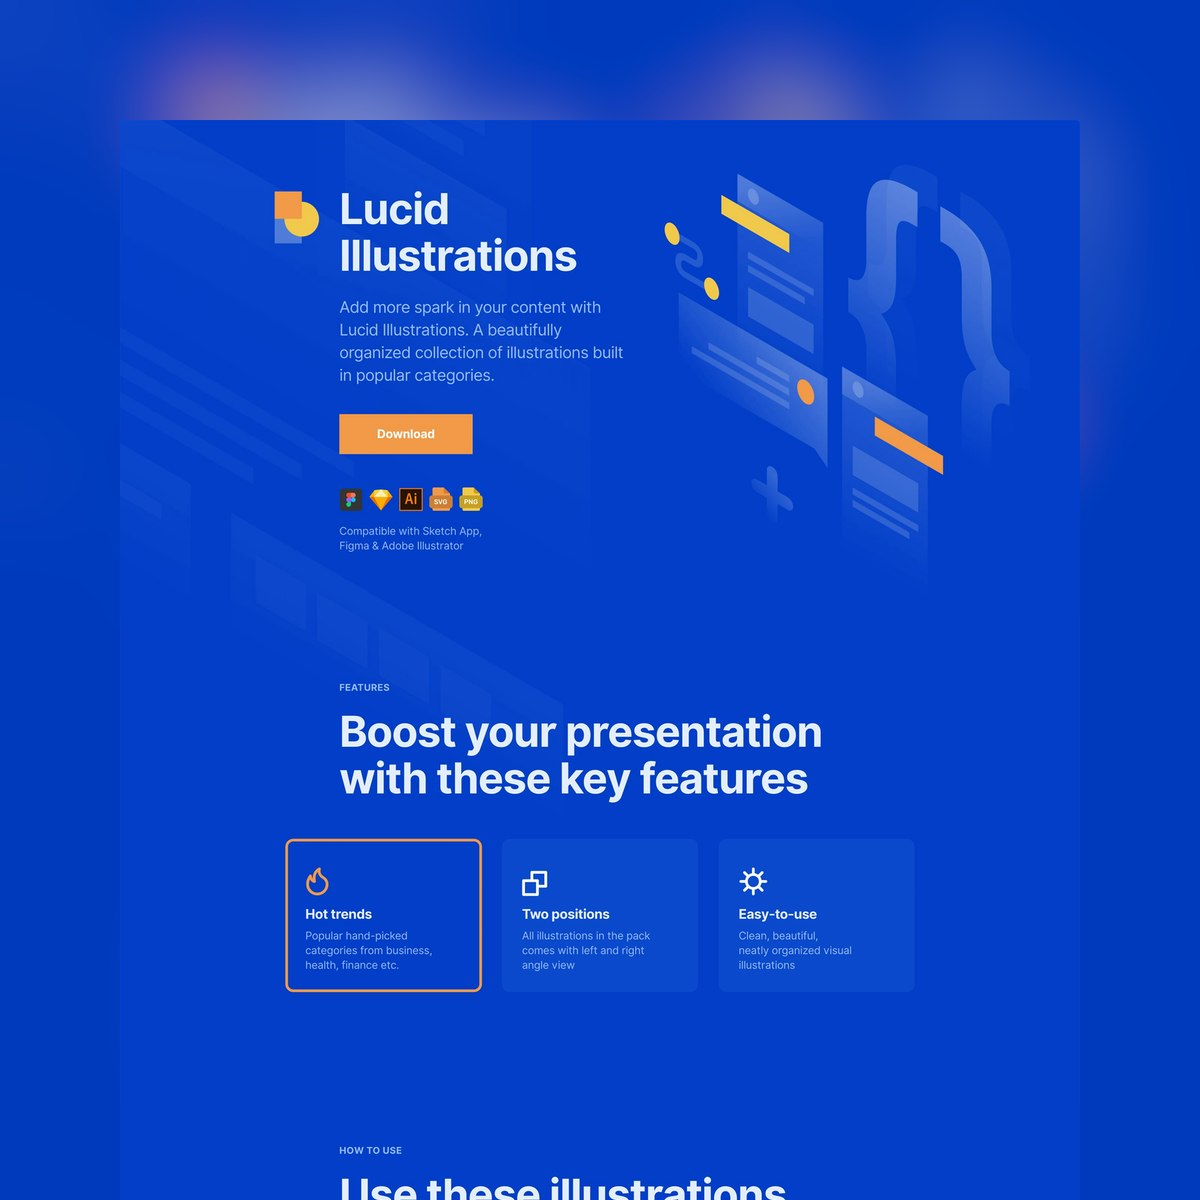 Product Page screen design idea #357: Website Inspiration: Lucid Illustrations